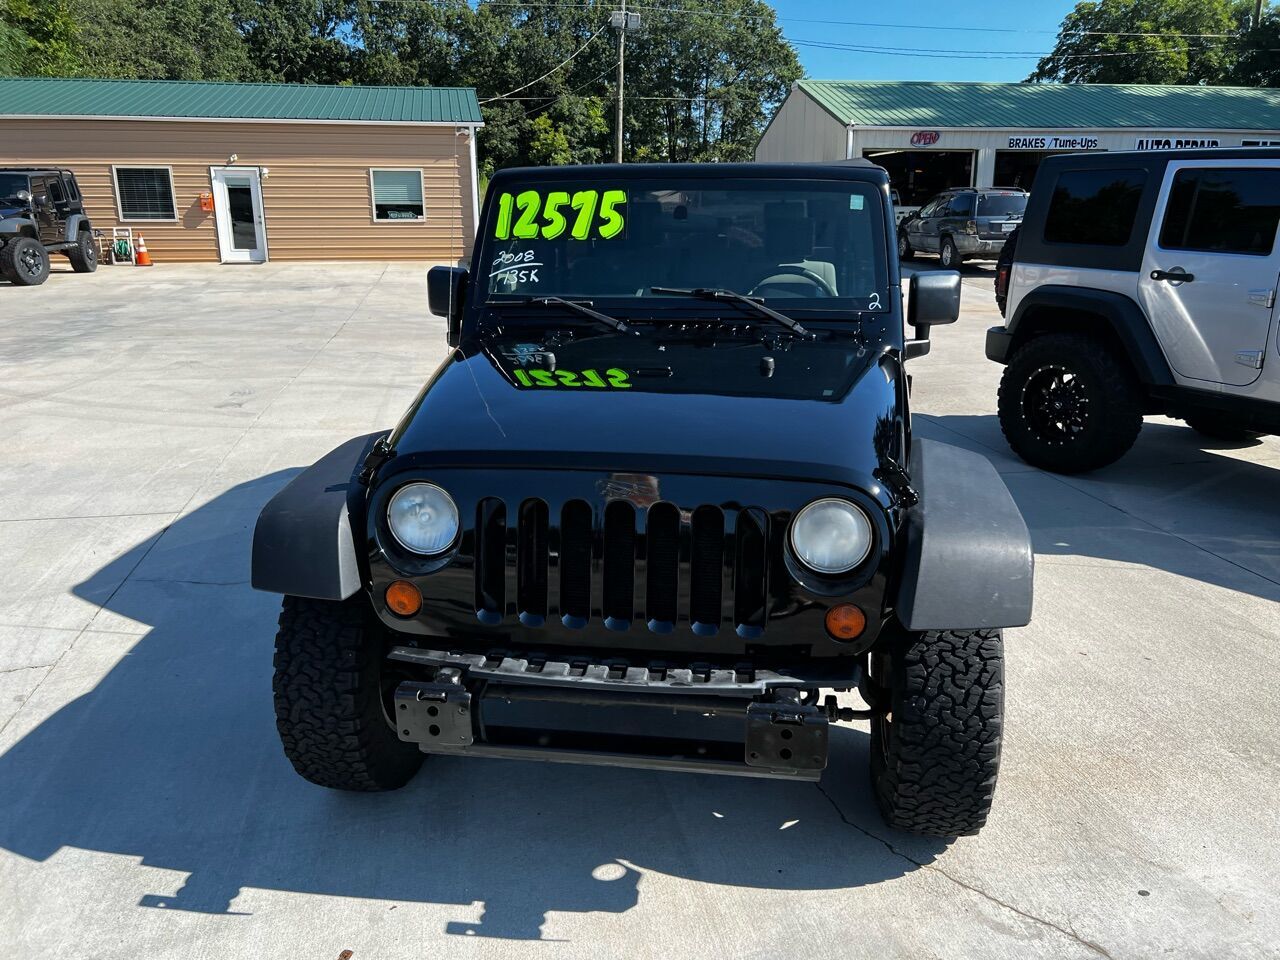 2008 Jeep Wrangler Unlimited For Sale In Greenville, SC ®